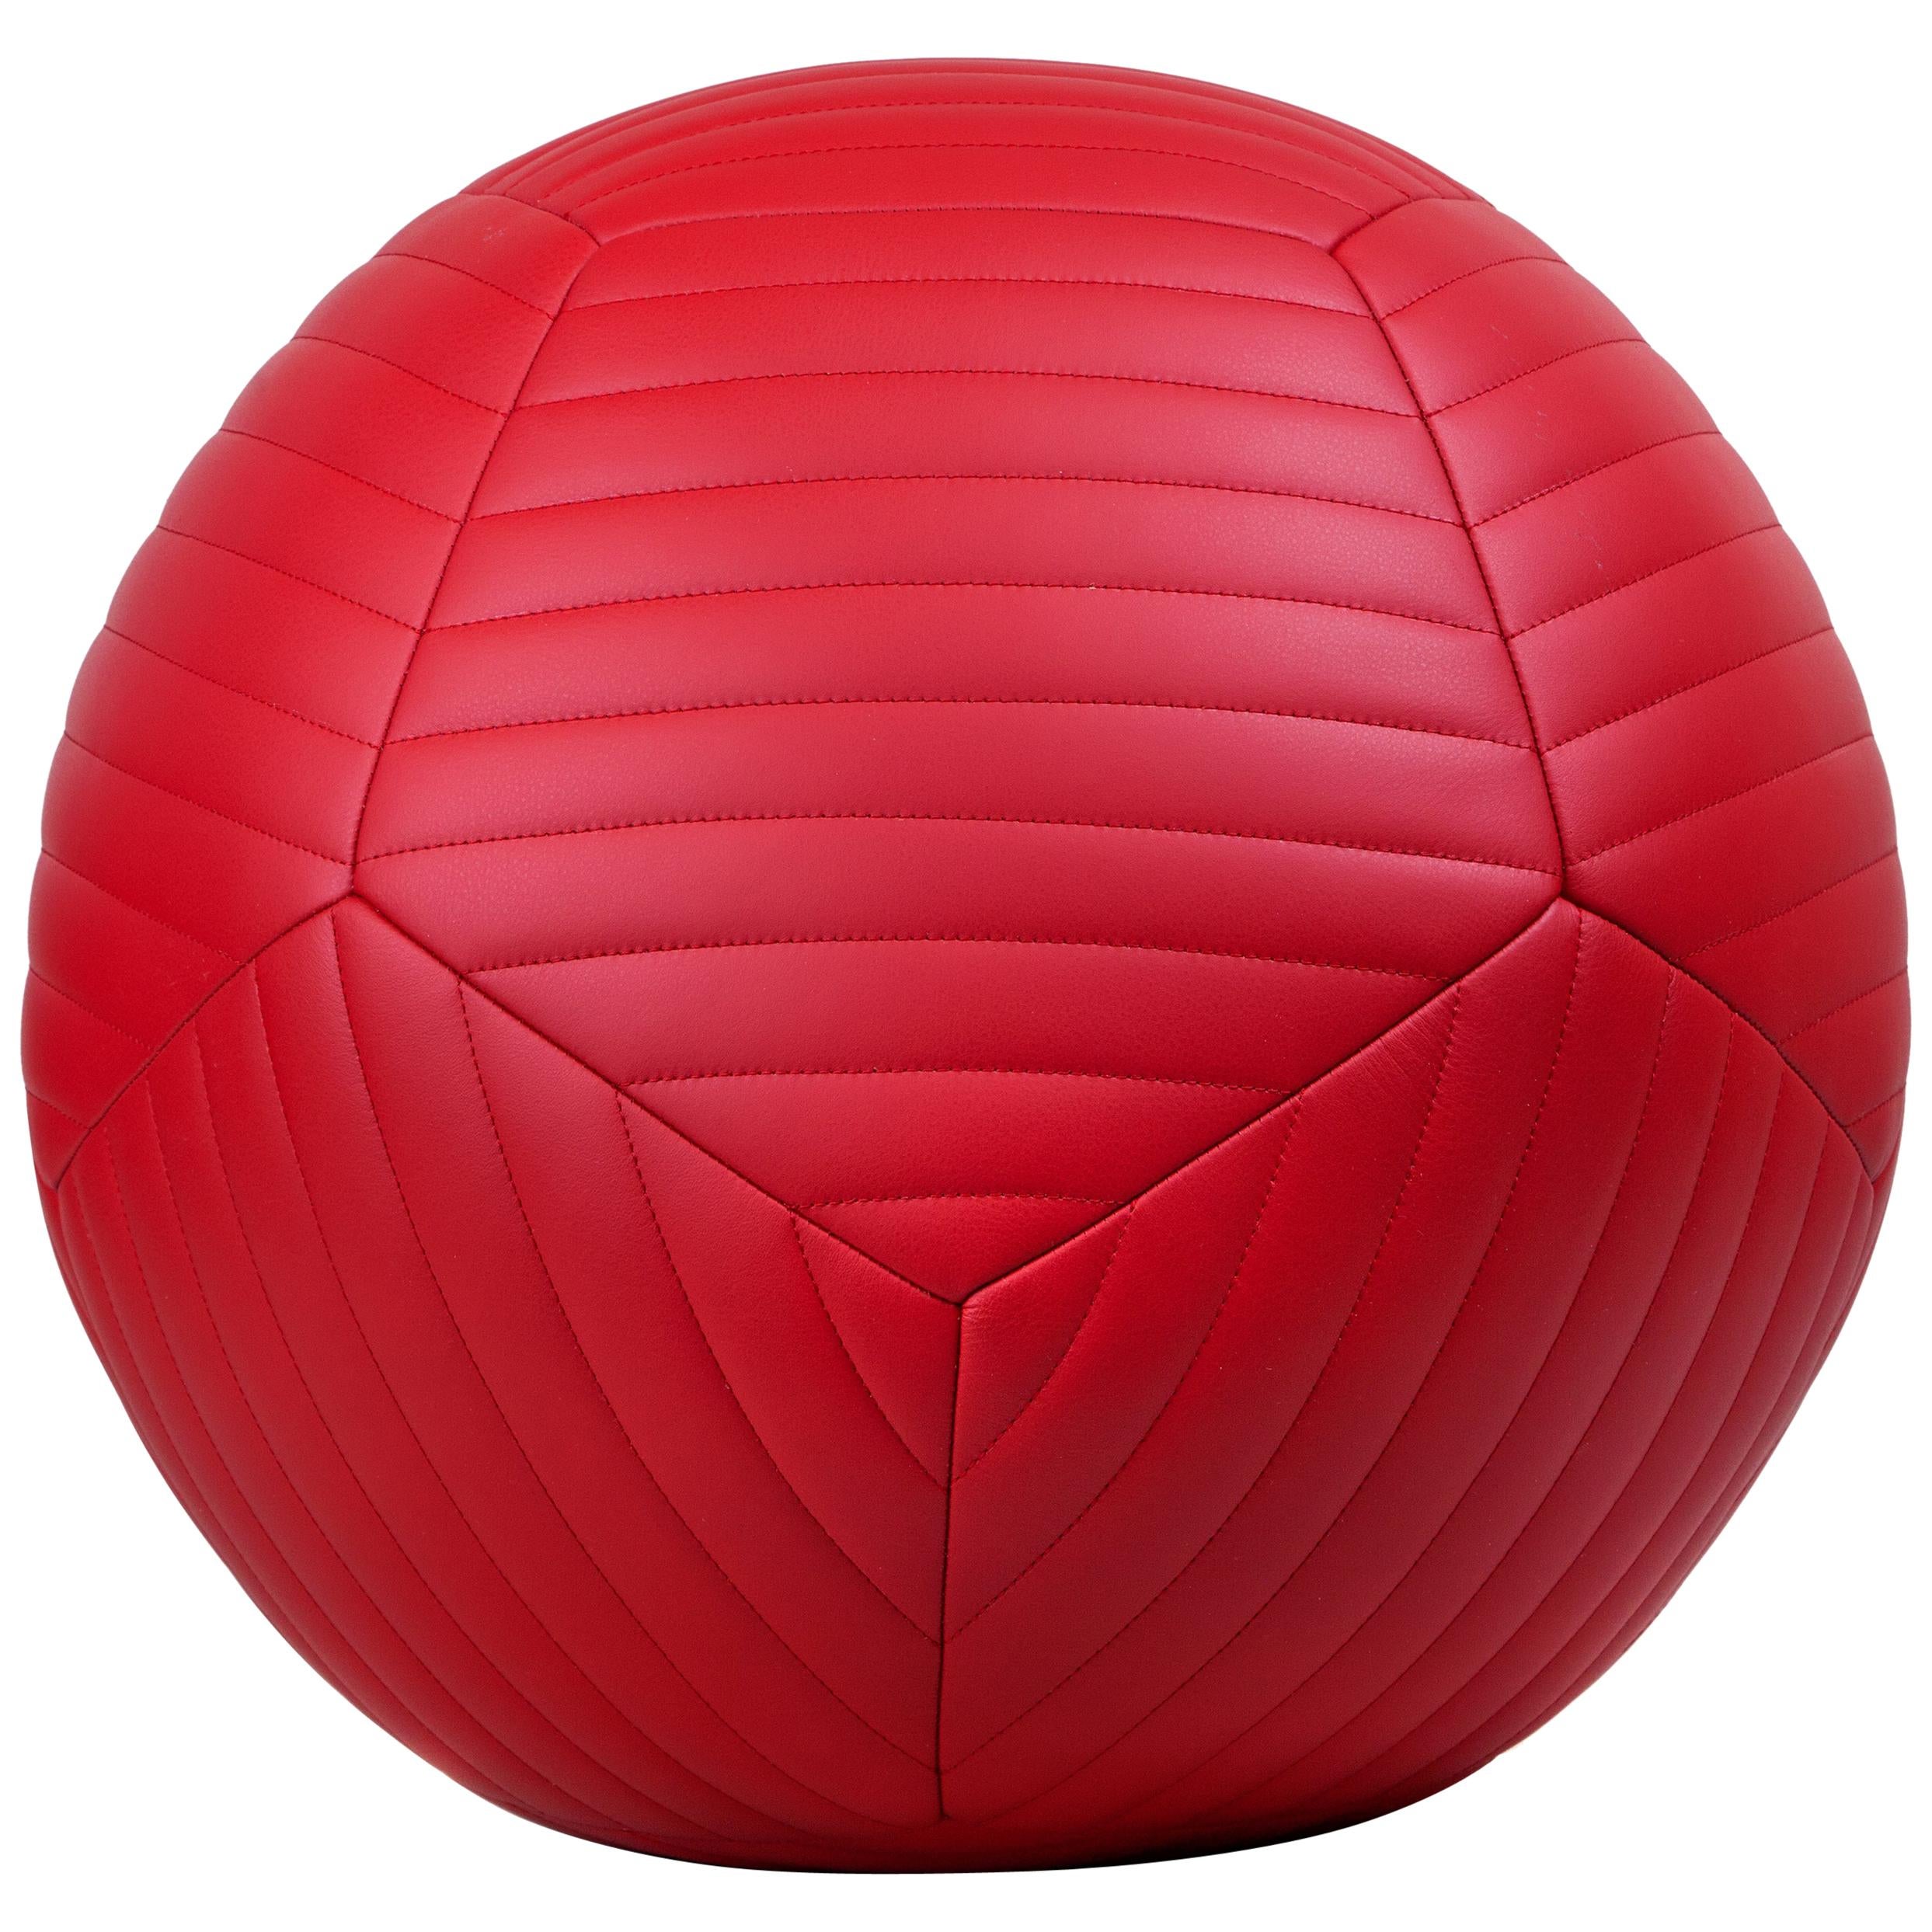 Banded Ottoman 18"Ø in Hibiscus Red Leather by Moses Nadel